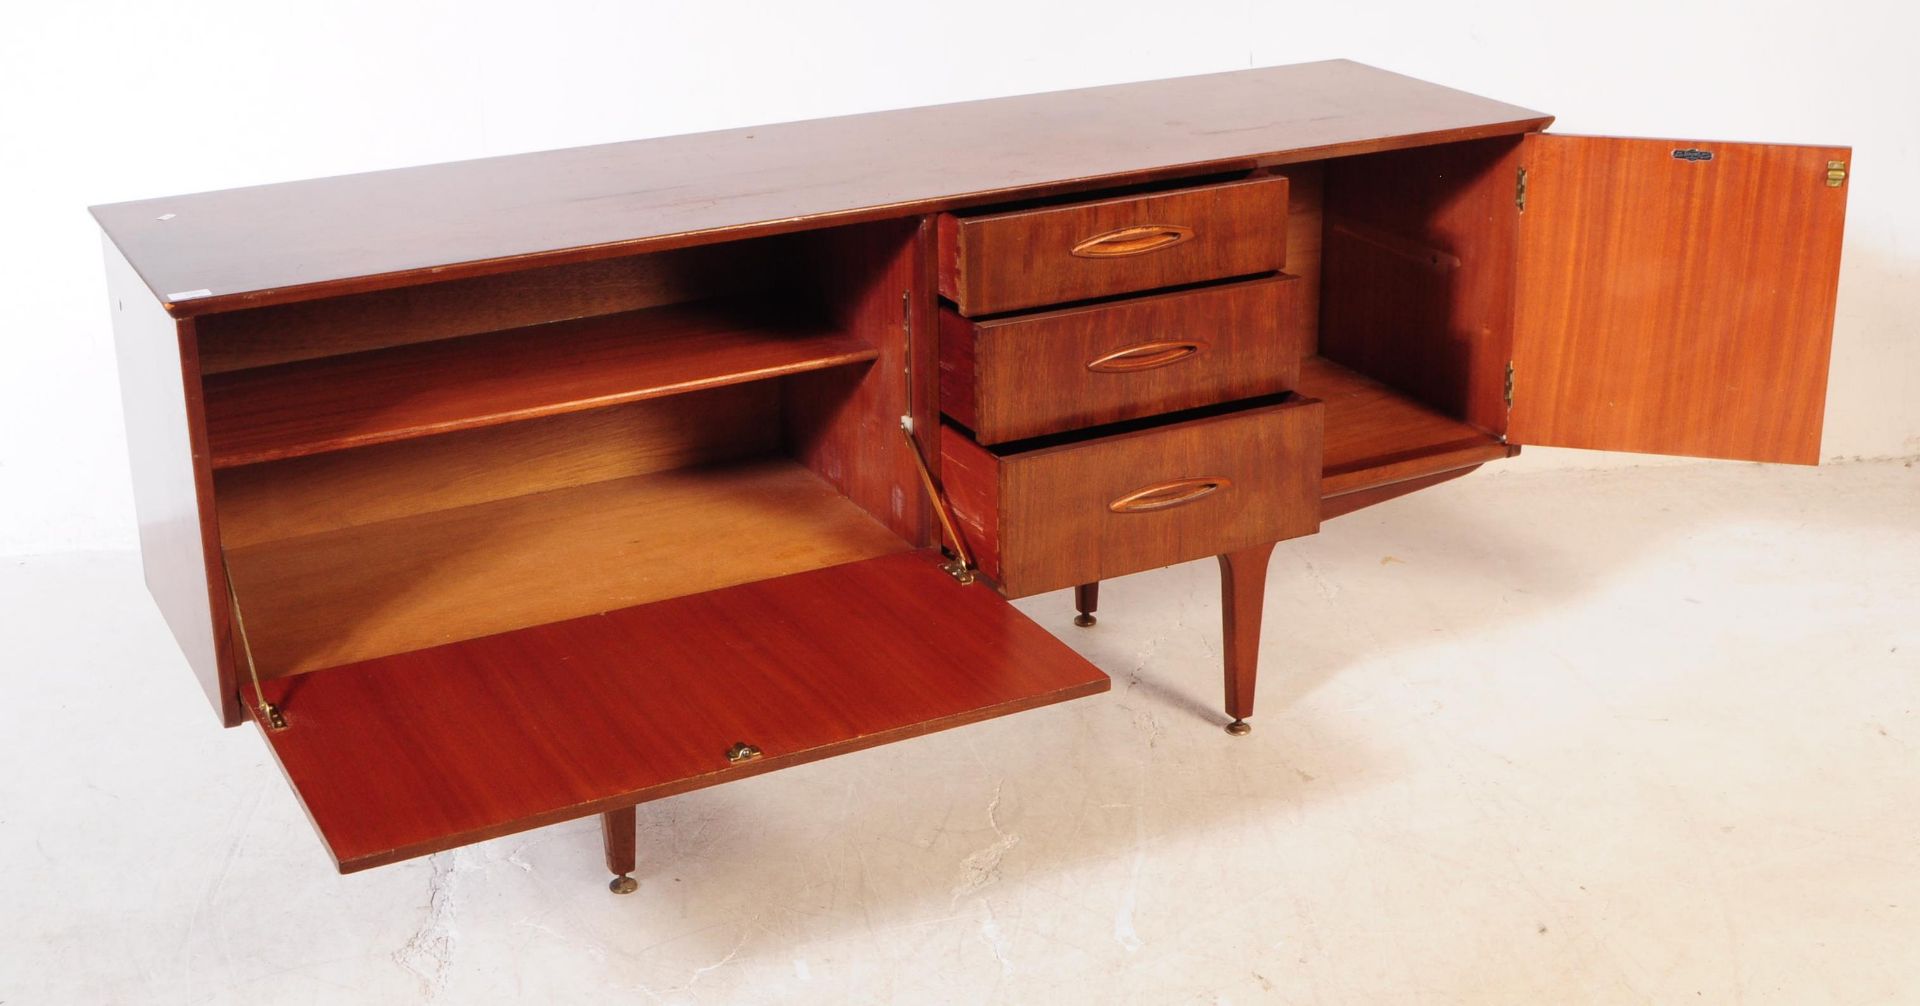 JENTIQUE FURNITURE - RETRO MID 20TH CENTURY SIDEBOARD - Image 2 of 7